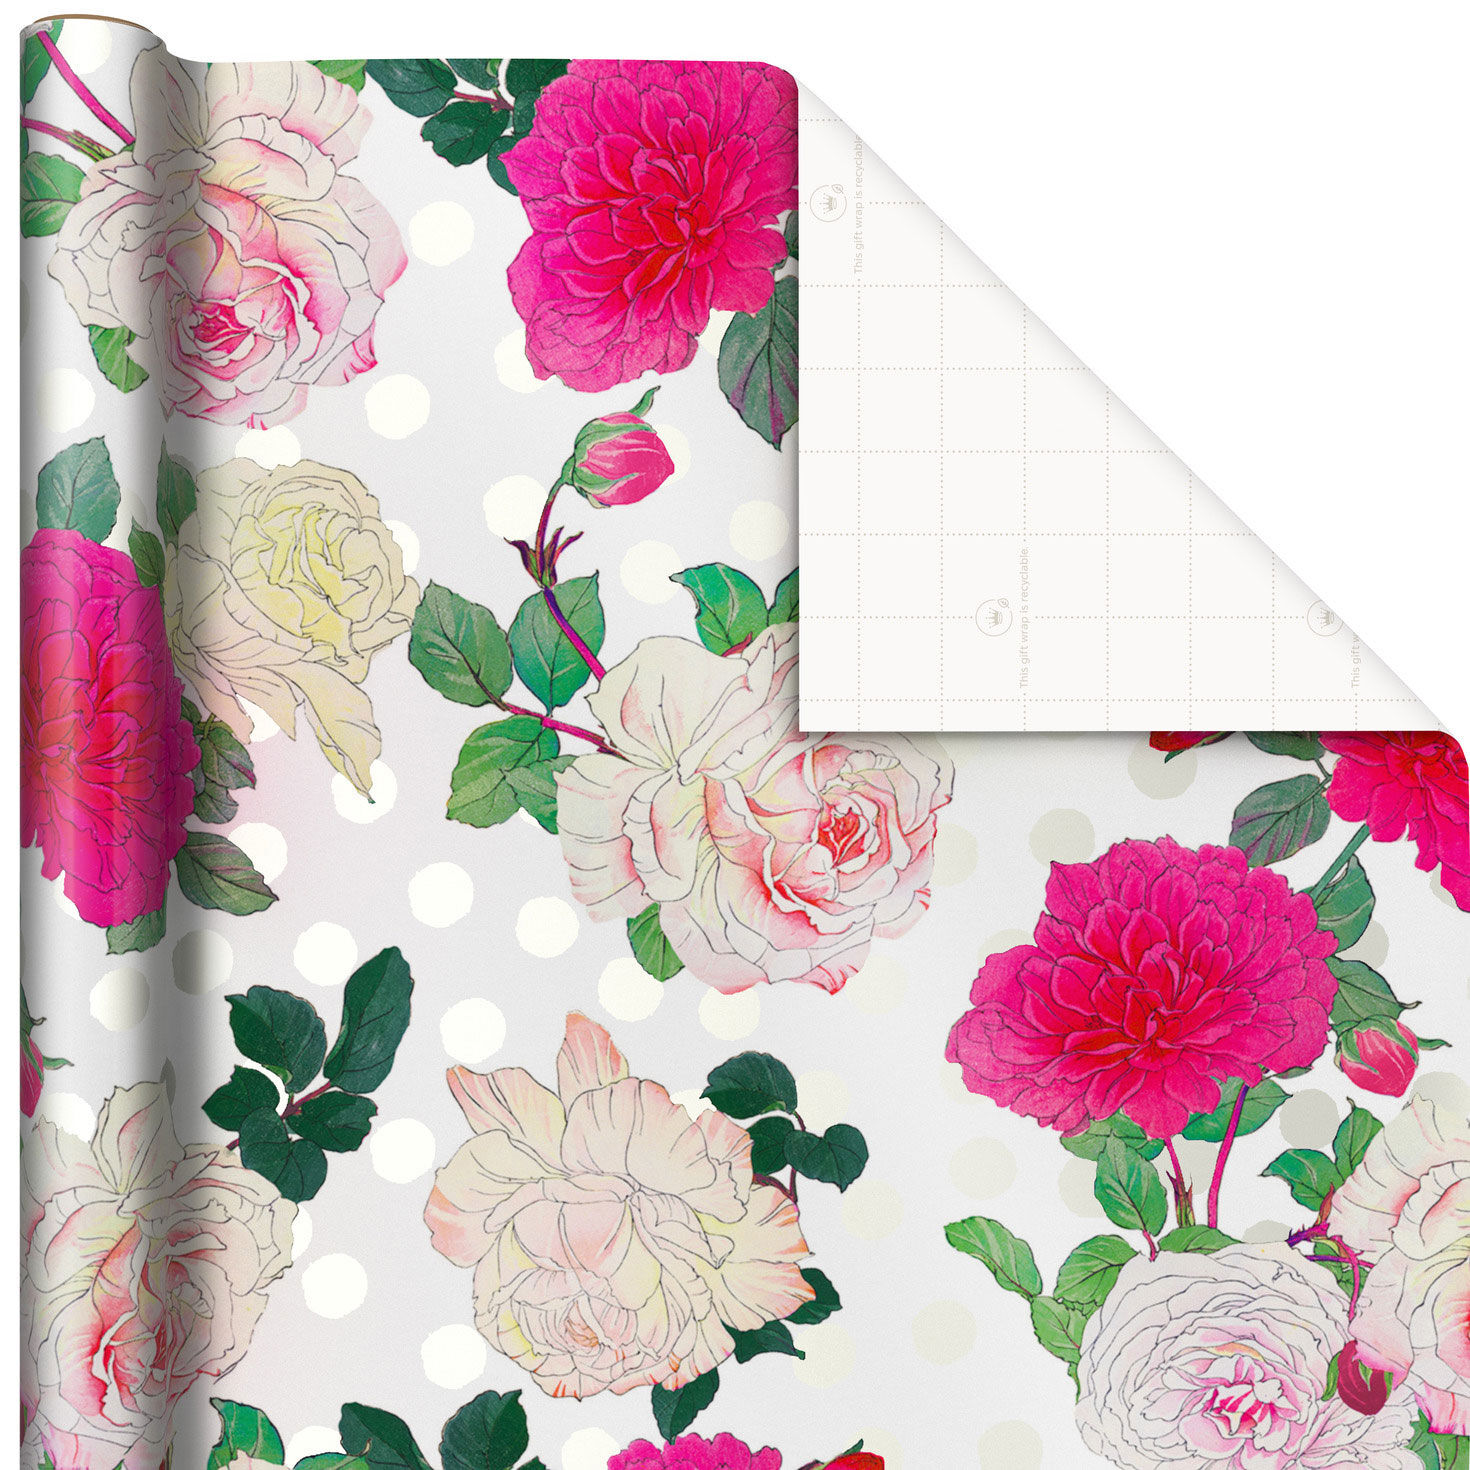 Illustrated Roses Wrapping Paper, 20 sq. ft. - Wrapping Paper - Hallmark